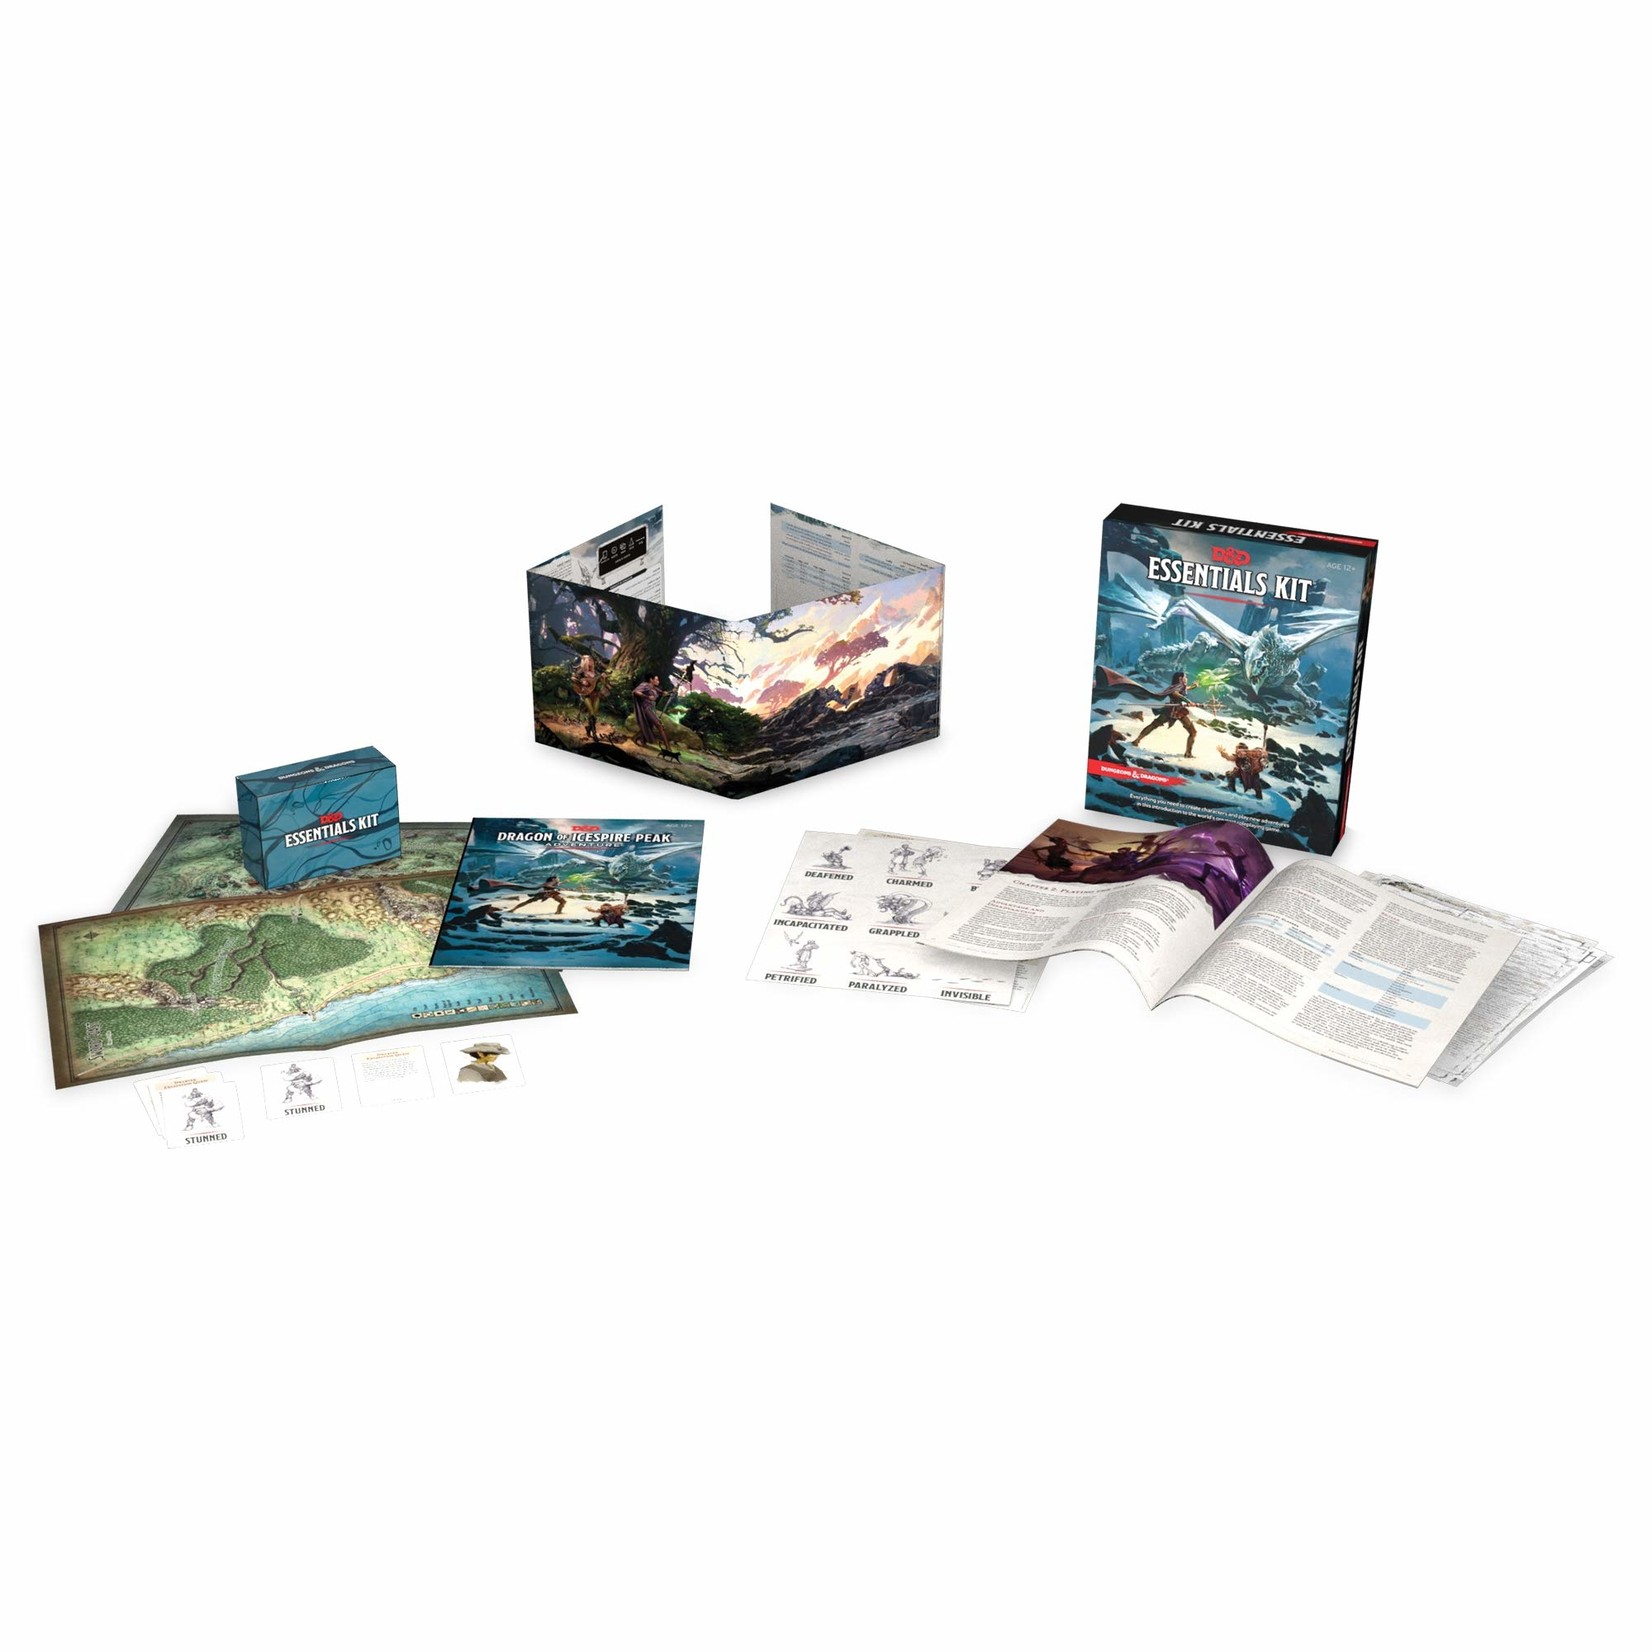 Wizards of the Coast D&D: Essentials Kit